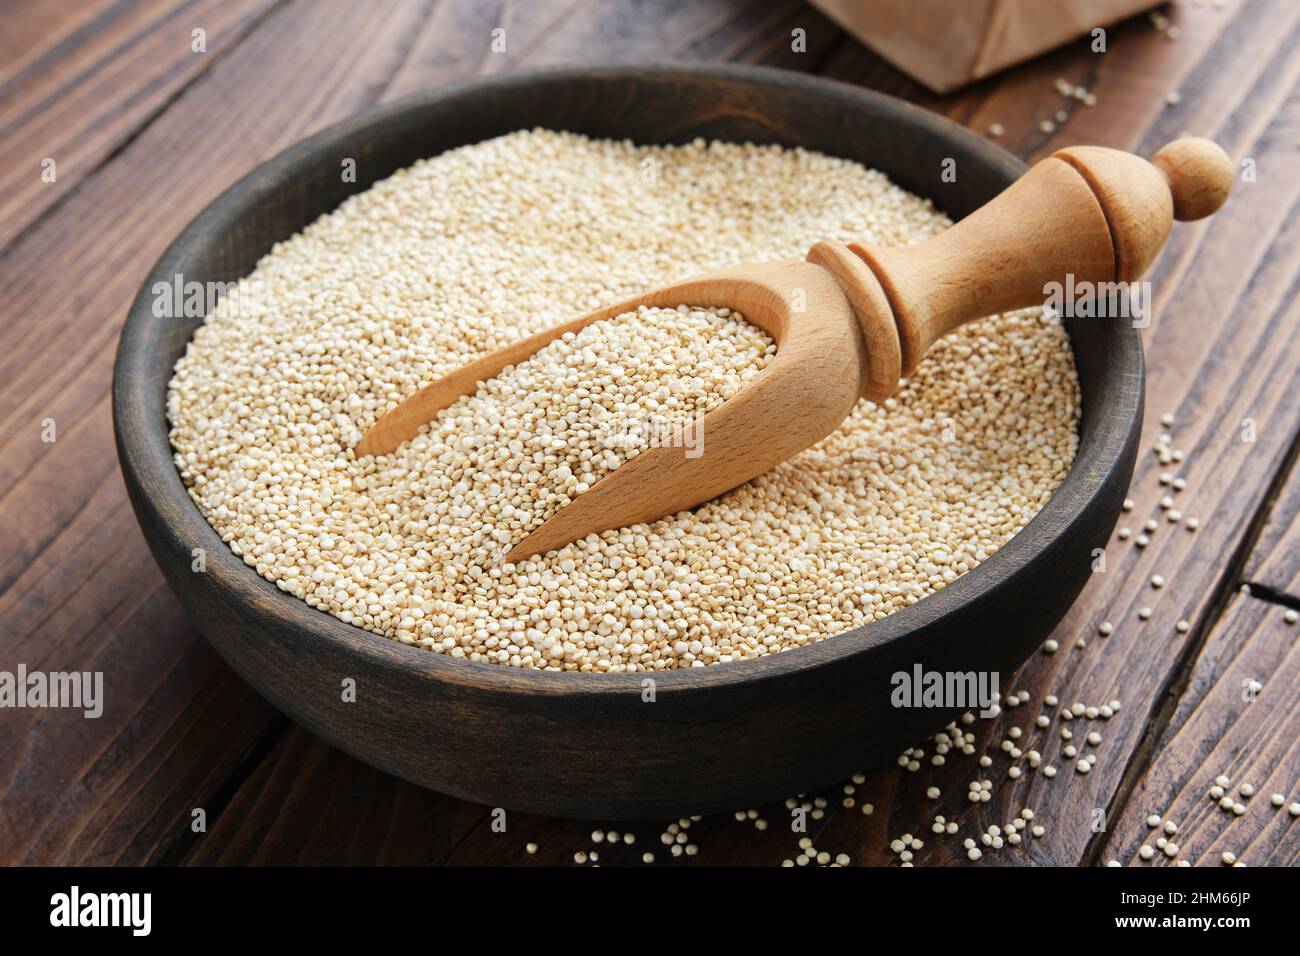 Quinoa grains in a wooden bowl on a wooden table. Stock Photo